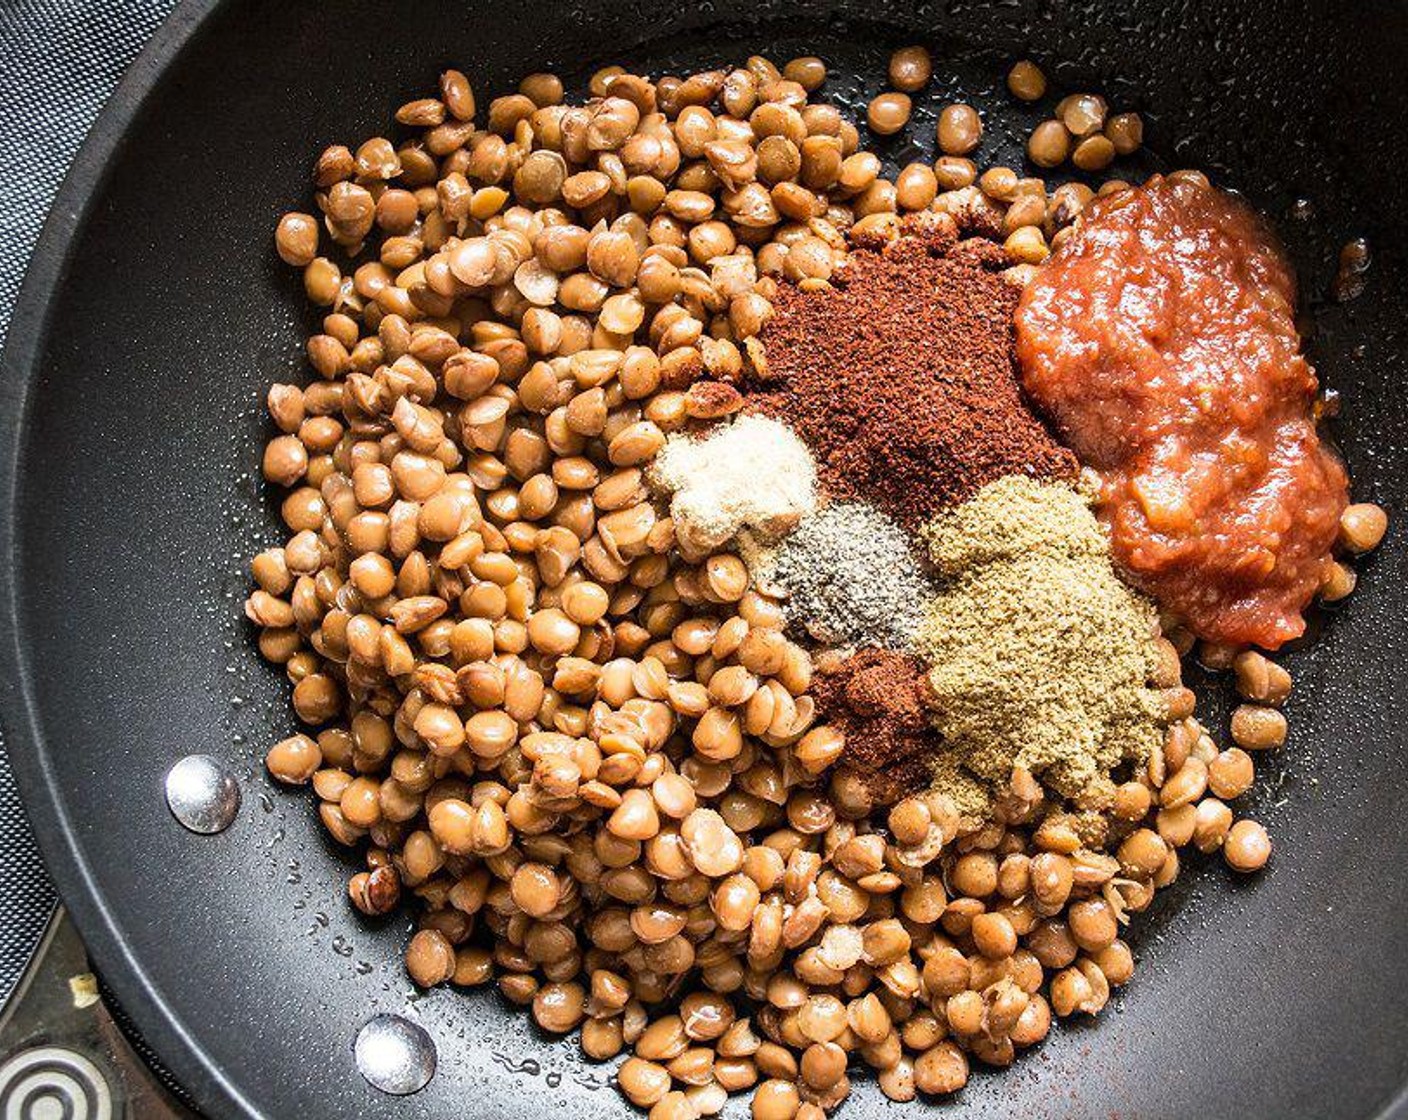 step 4 Meanwhile, add Lentils (1 can) to saute pan with Chili Powder (1/2 Tbsp), Ground Cumin (1 tsp), Ground Black Pepper (1/2 tsp), Sea Salt (1/4 tsp), Garlic Powder (1/4 tsp), Chipotle Chili Powder (1/8 tsp), and Salsa (2 Tbsp). Cook 5-7 minutes or until heated through. Stirring occasionally.